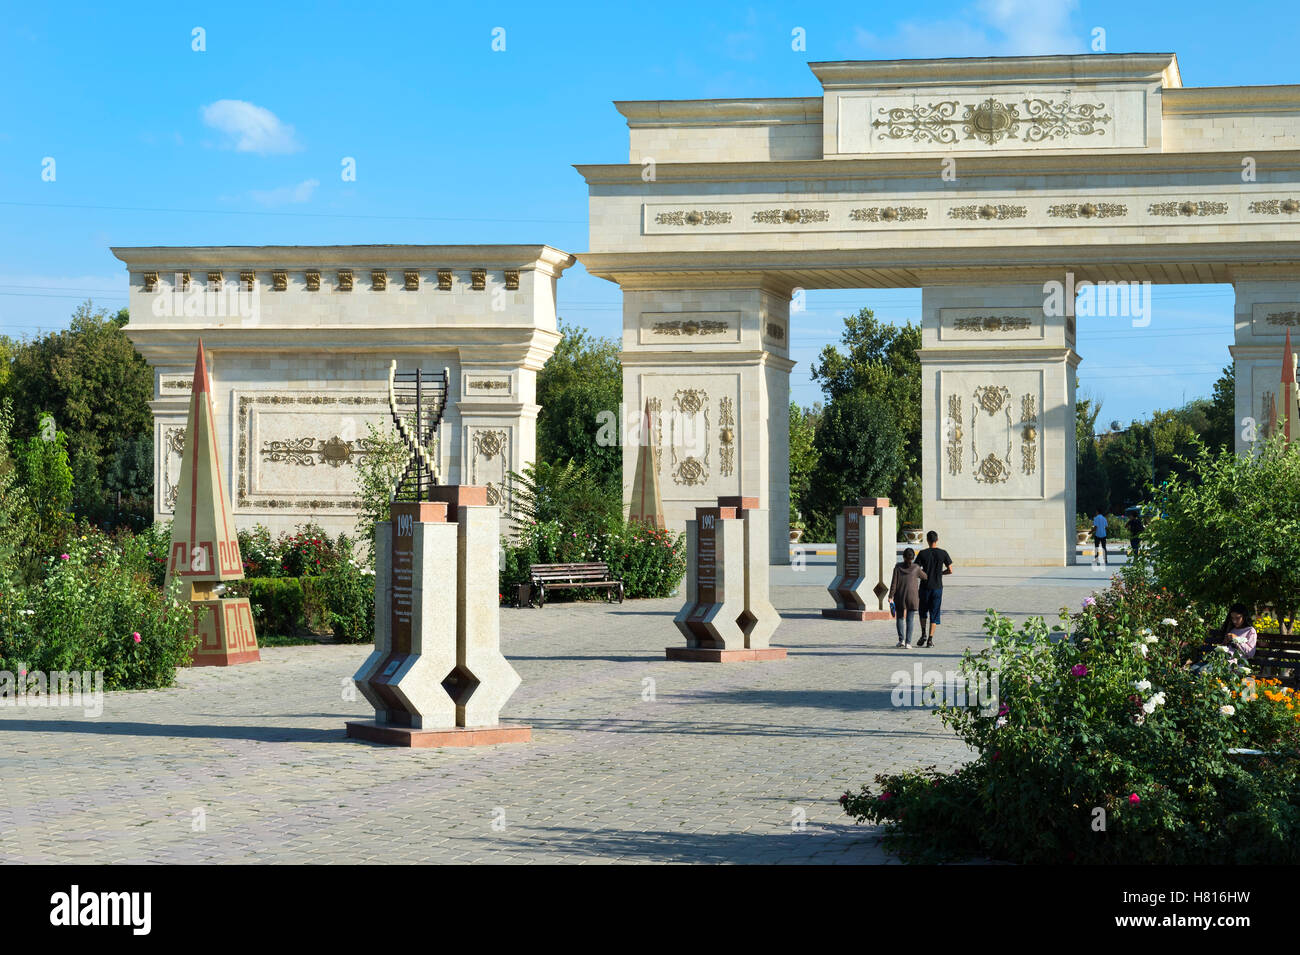 Independence Arch and stele alley, Independence Park, Shymkent, South Region, Kazakhstan, Central Asia Stock Photo